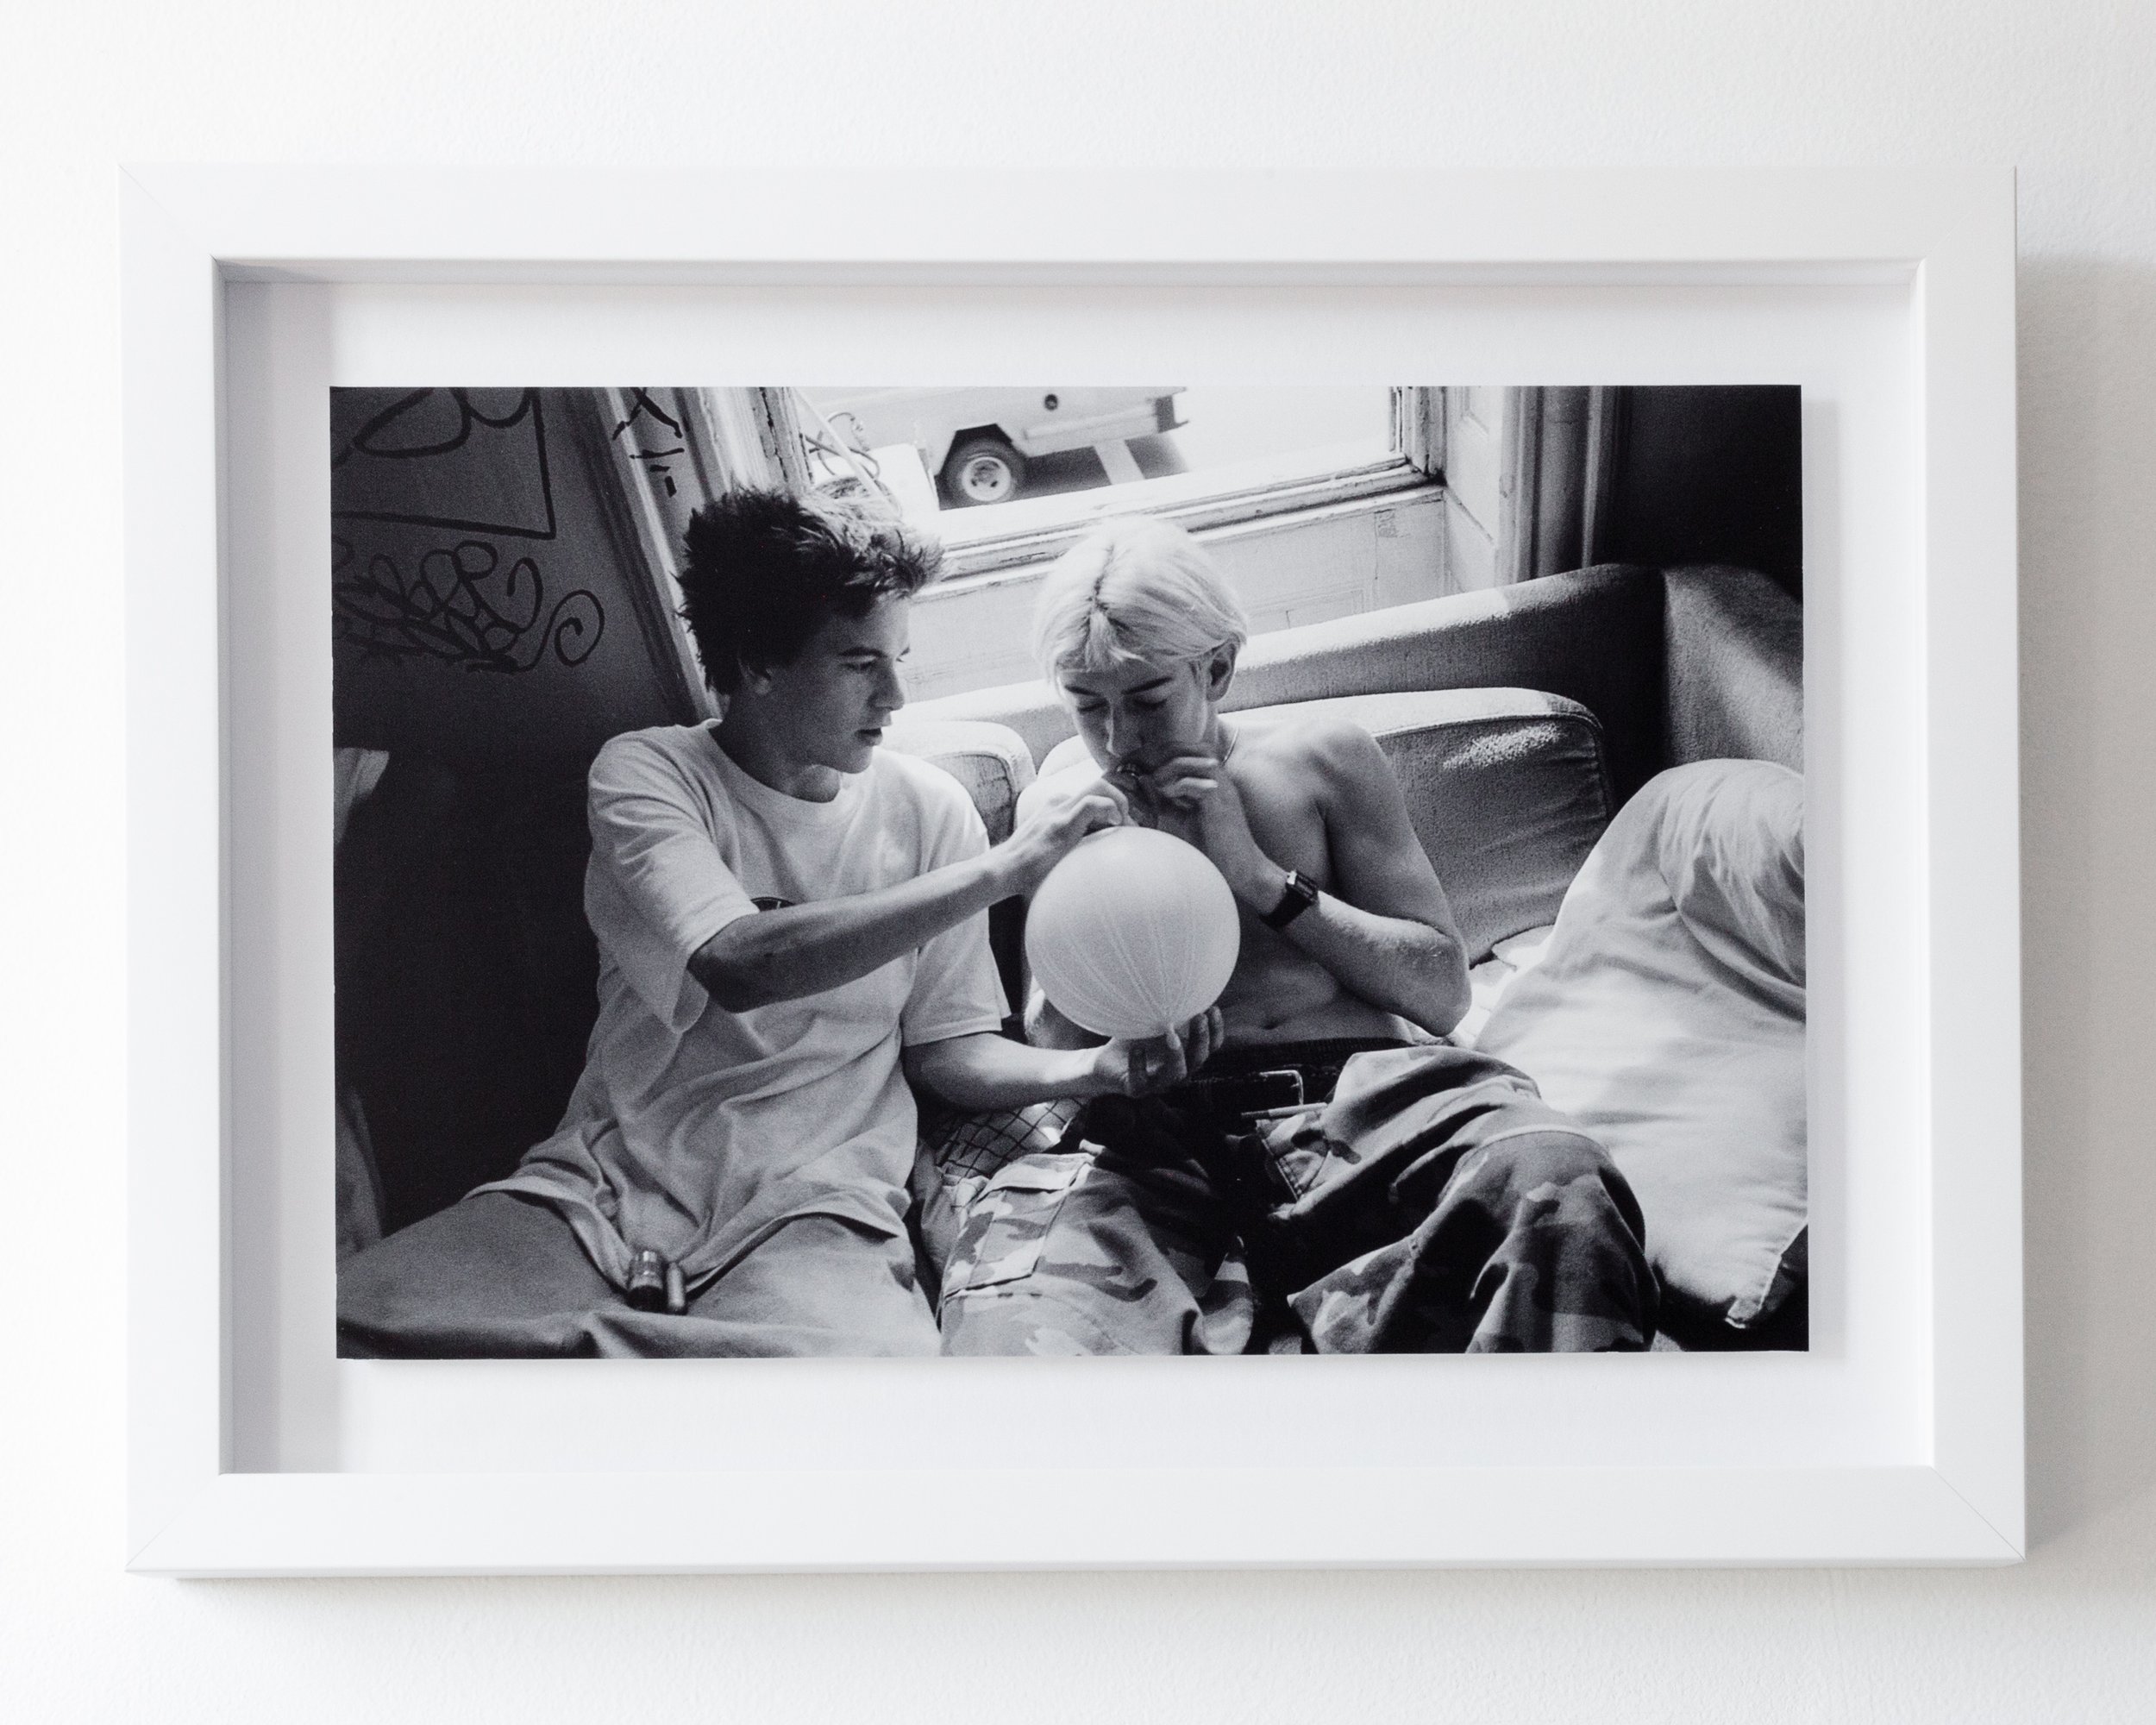  Eric Alan Edwards  Doing Whippets and&nbsp; candid talk about sex.  1995-2023 24,8 x 34,3 x 2,9 cm&nbsp; (9 ¾ x 13 ½ x 11/8 in)Inkjet on archival paper in artist frame, edition of 3, 1 AP 